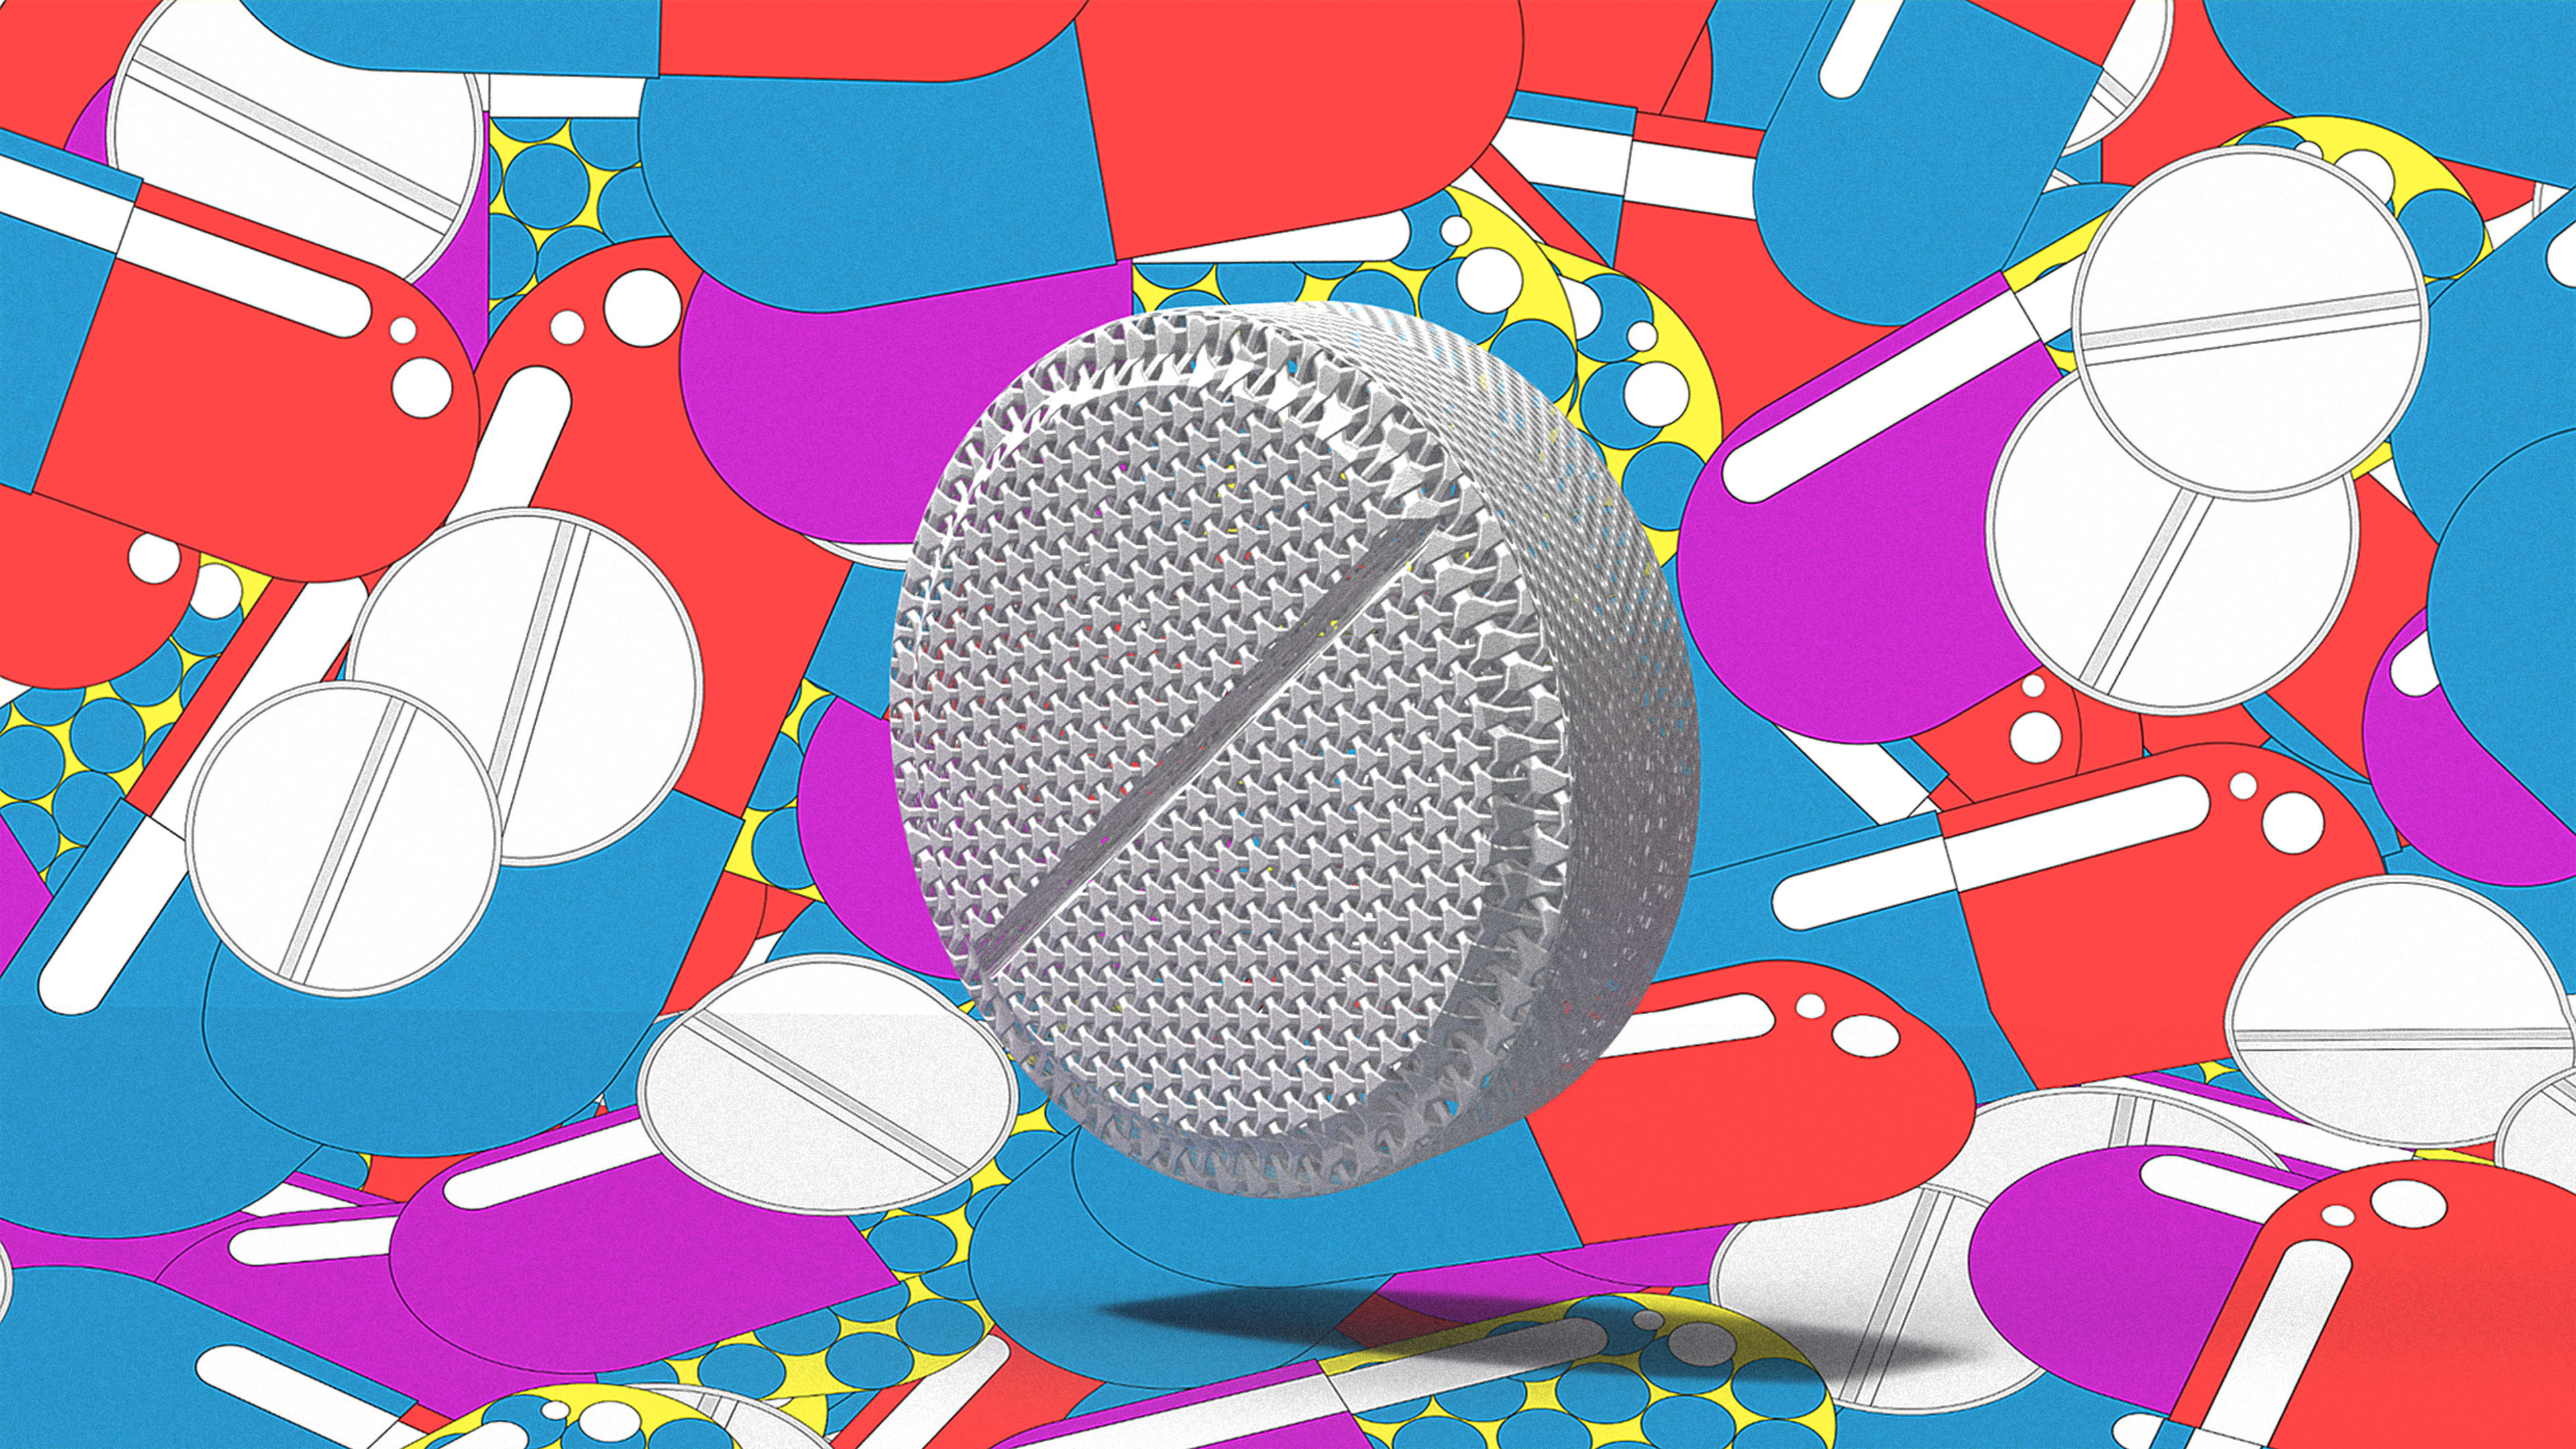 What if you could condense all your pills into one? With 3D printing, you can